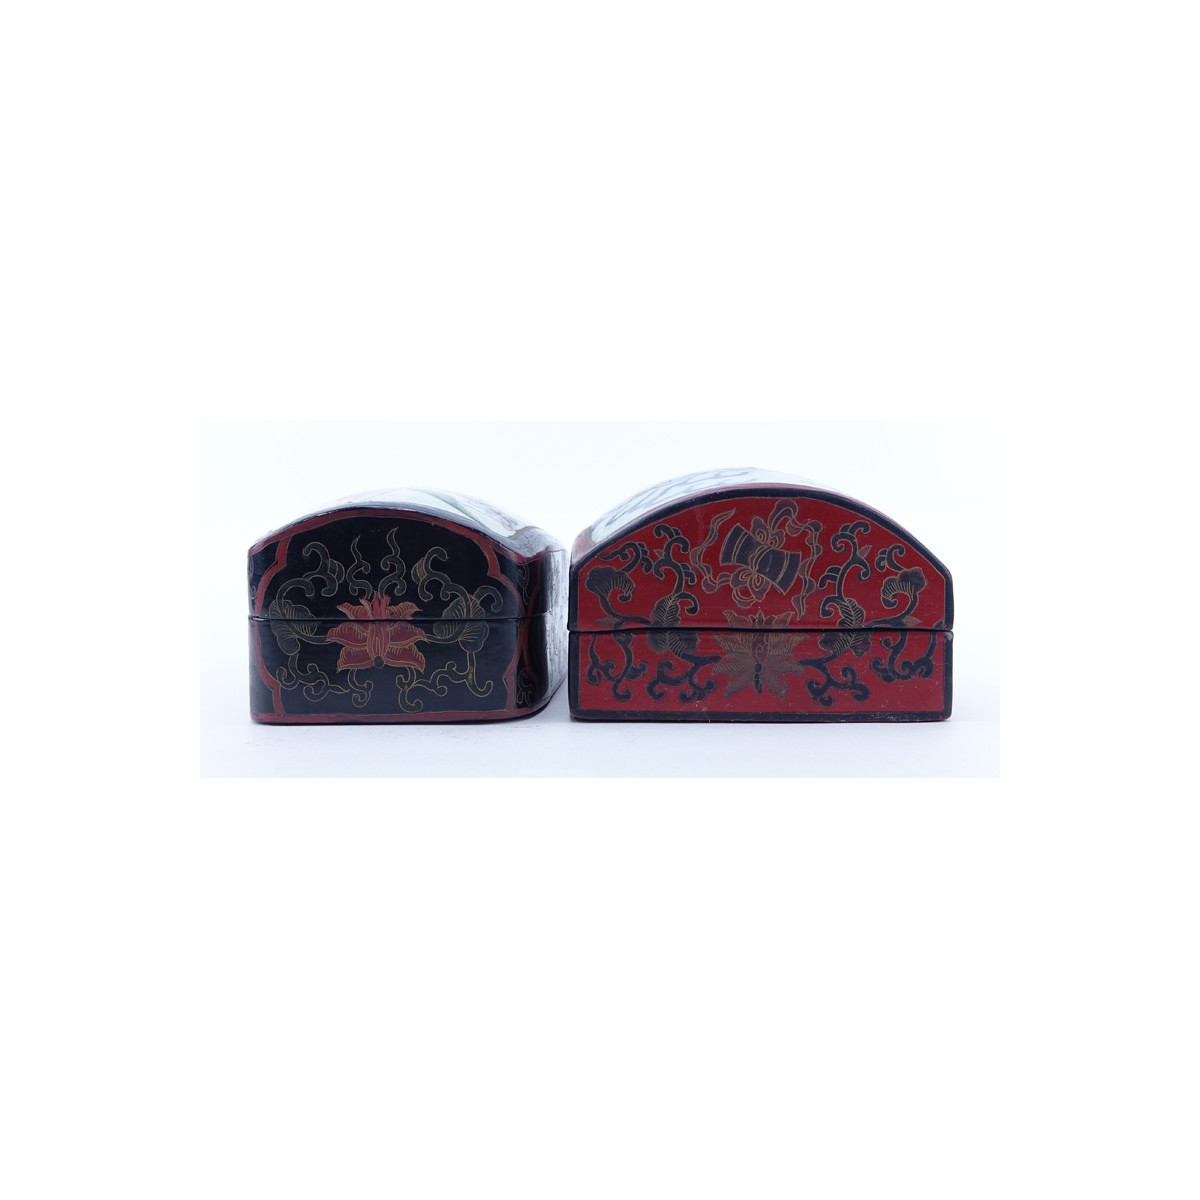 Two Chinese Lacquer and Porcelain Boxes. Both boxes with inset convex porcelain plaques. Unsigned.